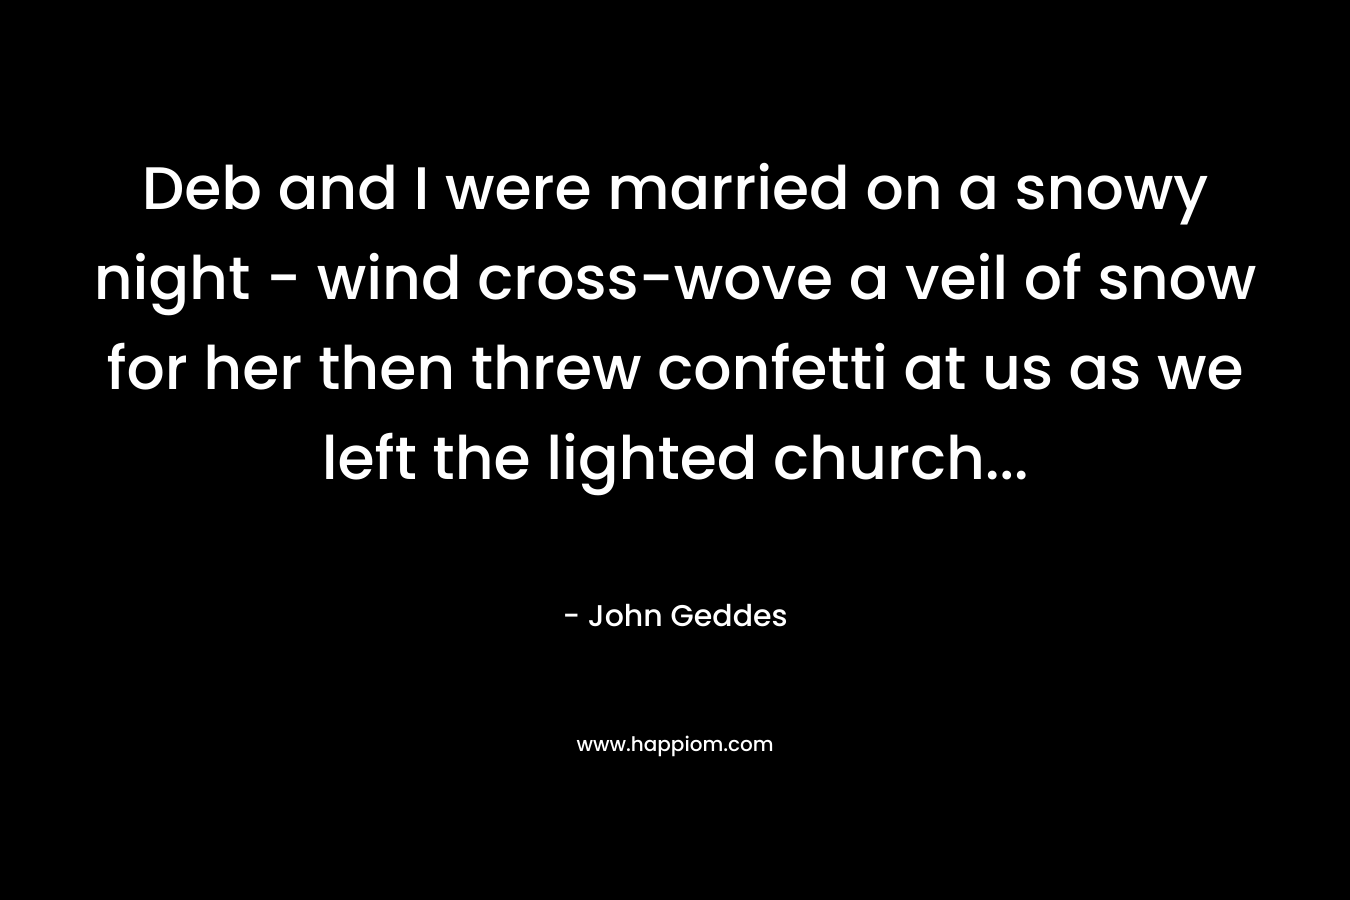 Deb and I were married on a snowy night – wind cross-wove a veil of snow for her then threw confetti at us as we left the lighted church… – John Geddes